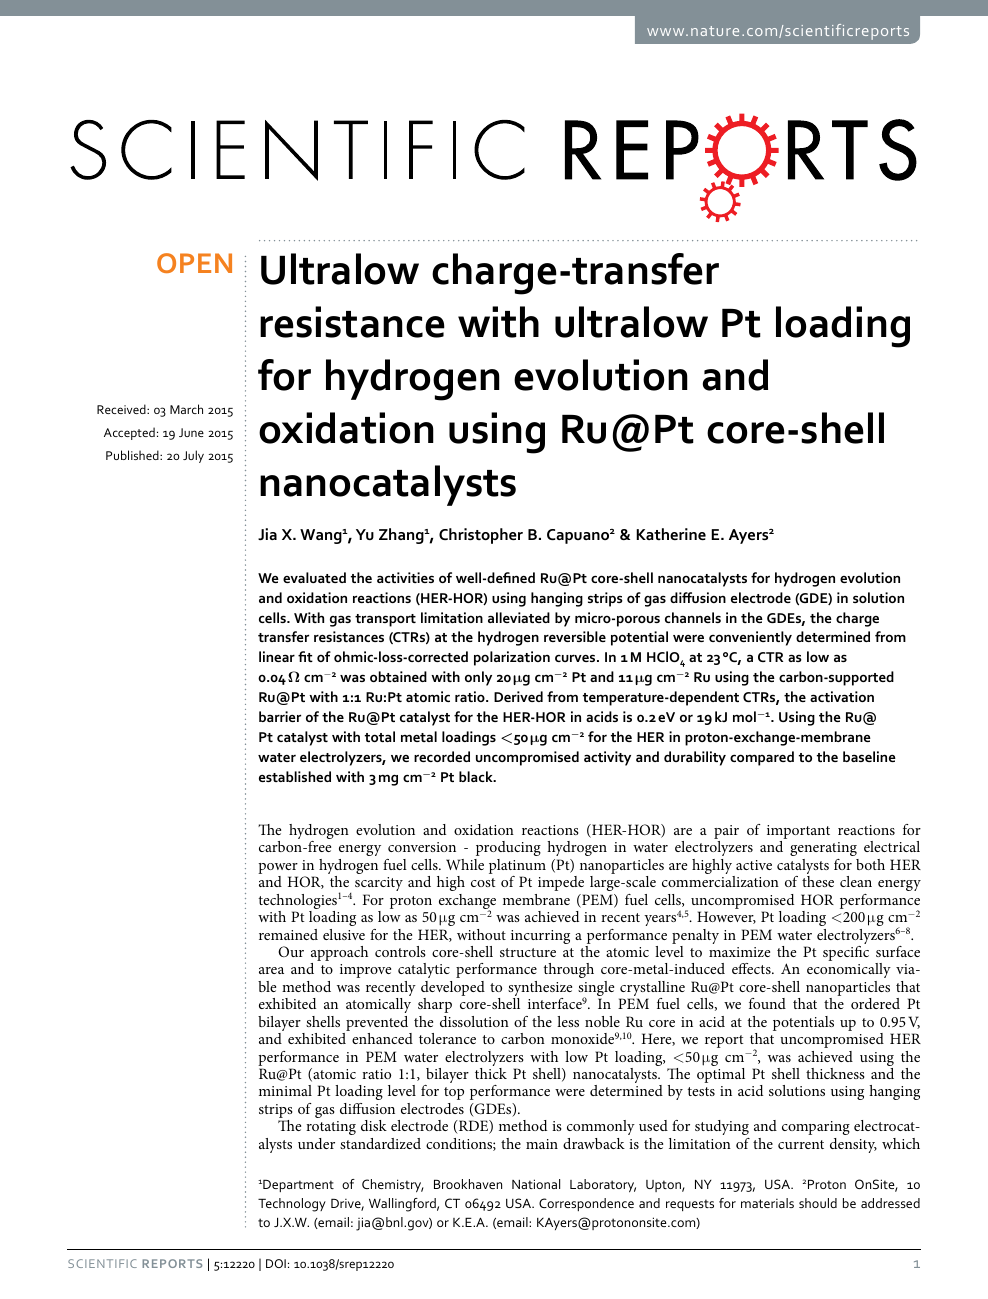 Ultralow Charge Transfer Resistance With Ultralow Pt Loading For Hydrogen Evolution And Oxidation Using Ru Pt Core Shell Nanocatalysts Topic Of Research Paper In Nano Technology Download Scholarly Article Pdf And Read For Free On